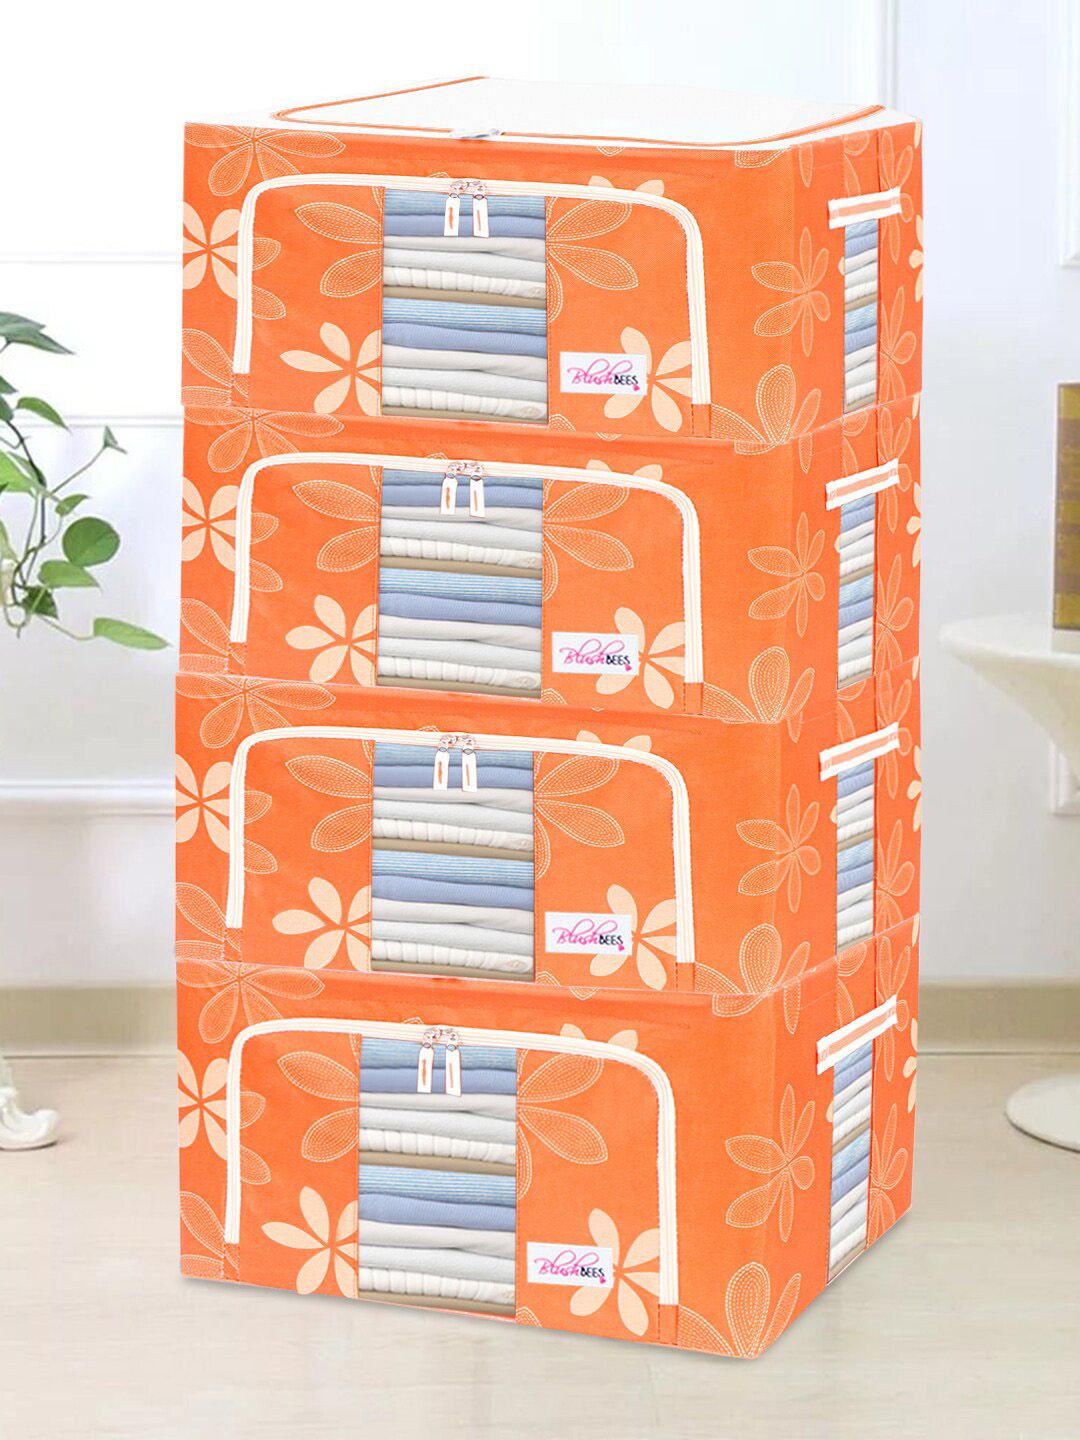 BlushBees Set Of 4 Orange & White Printed Foldable Living Box Price in India